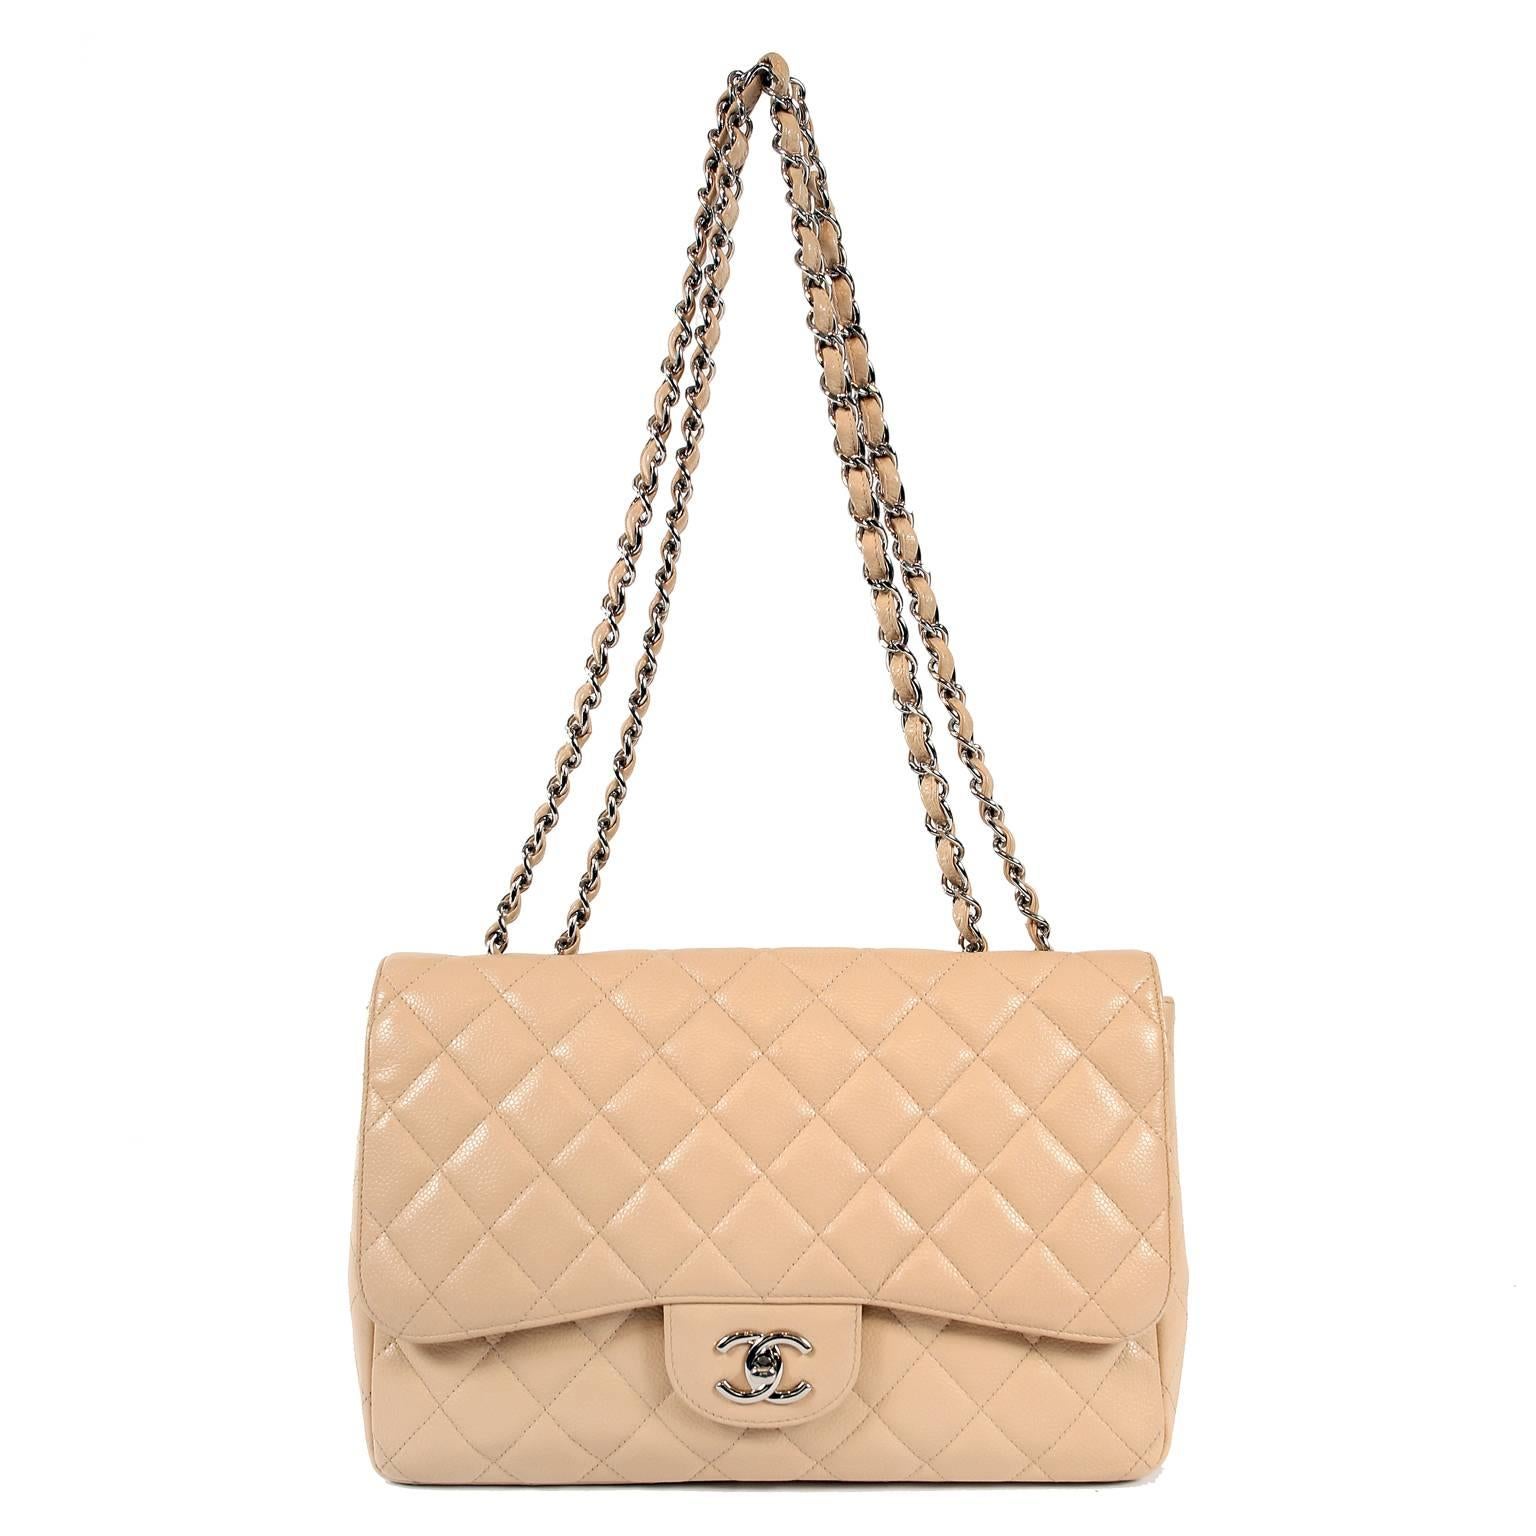 Chanel Beige Clair Caviar Leather Jumbo Classic Flap Bag with Silver HW 11